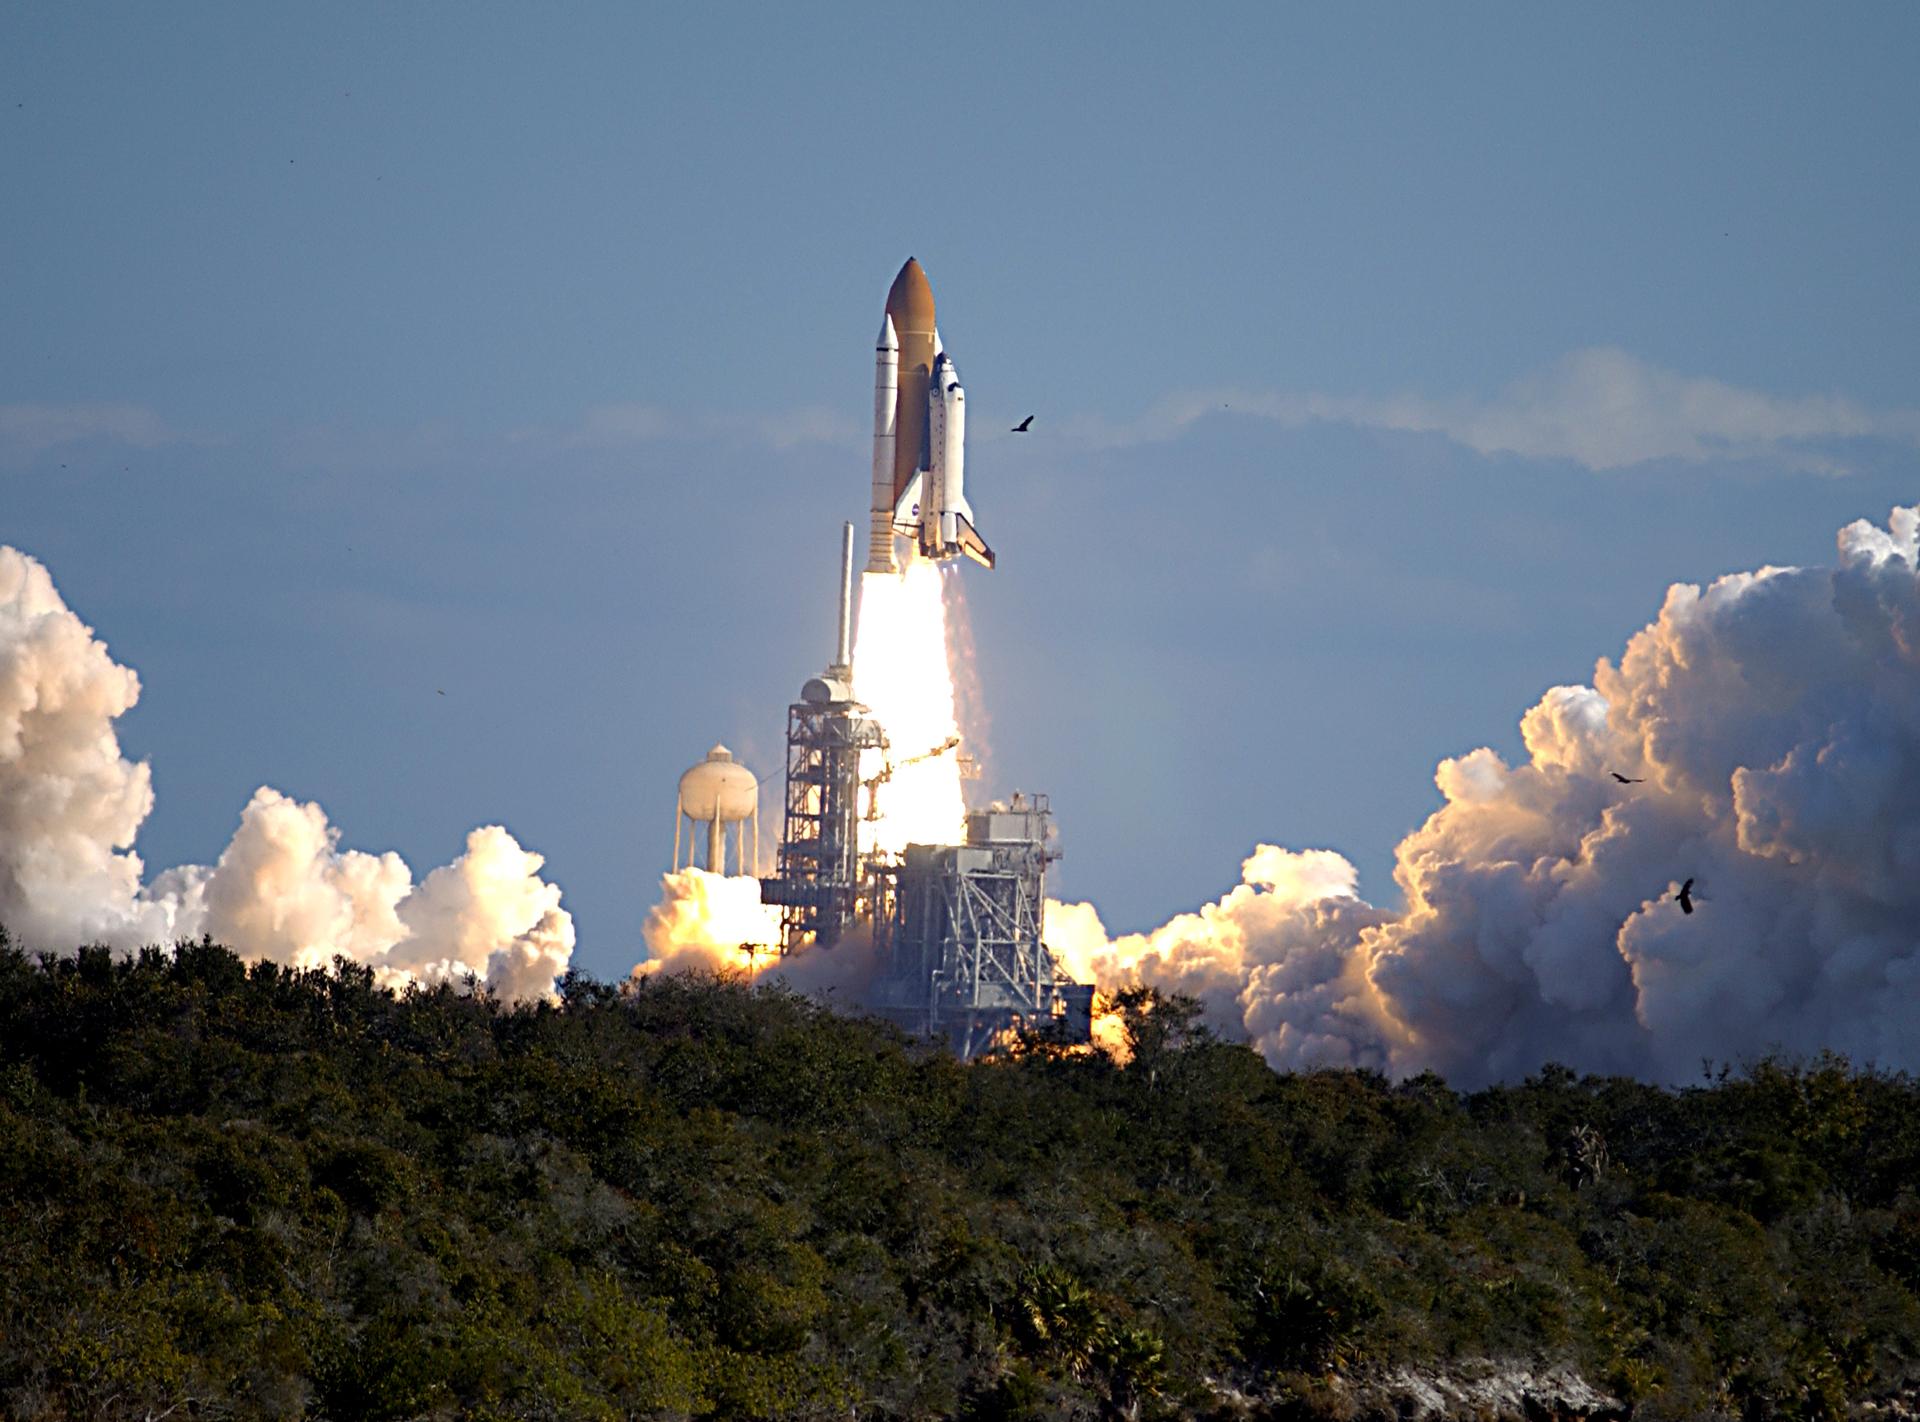 Launch of the Space Shuttle for STS-107